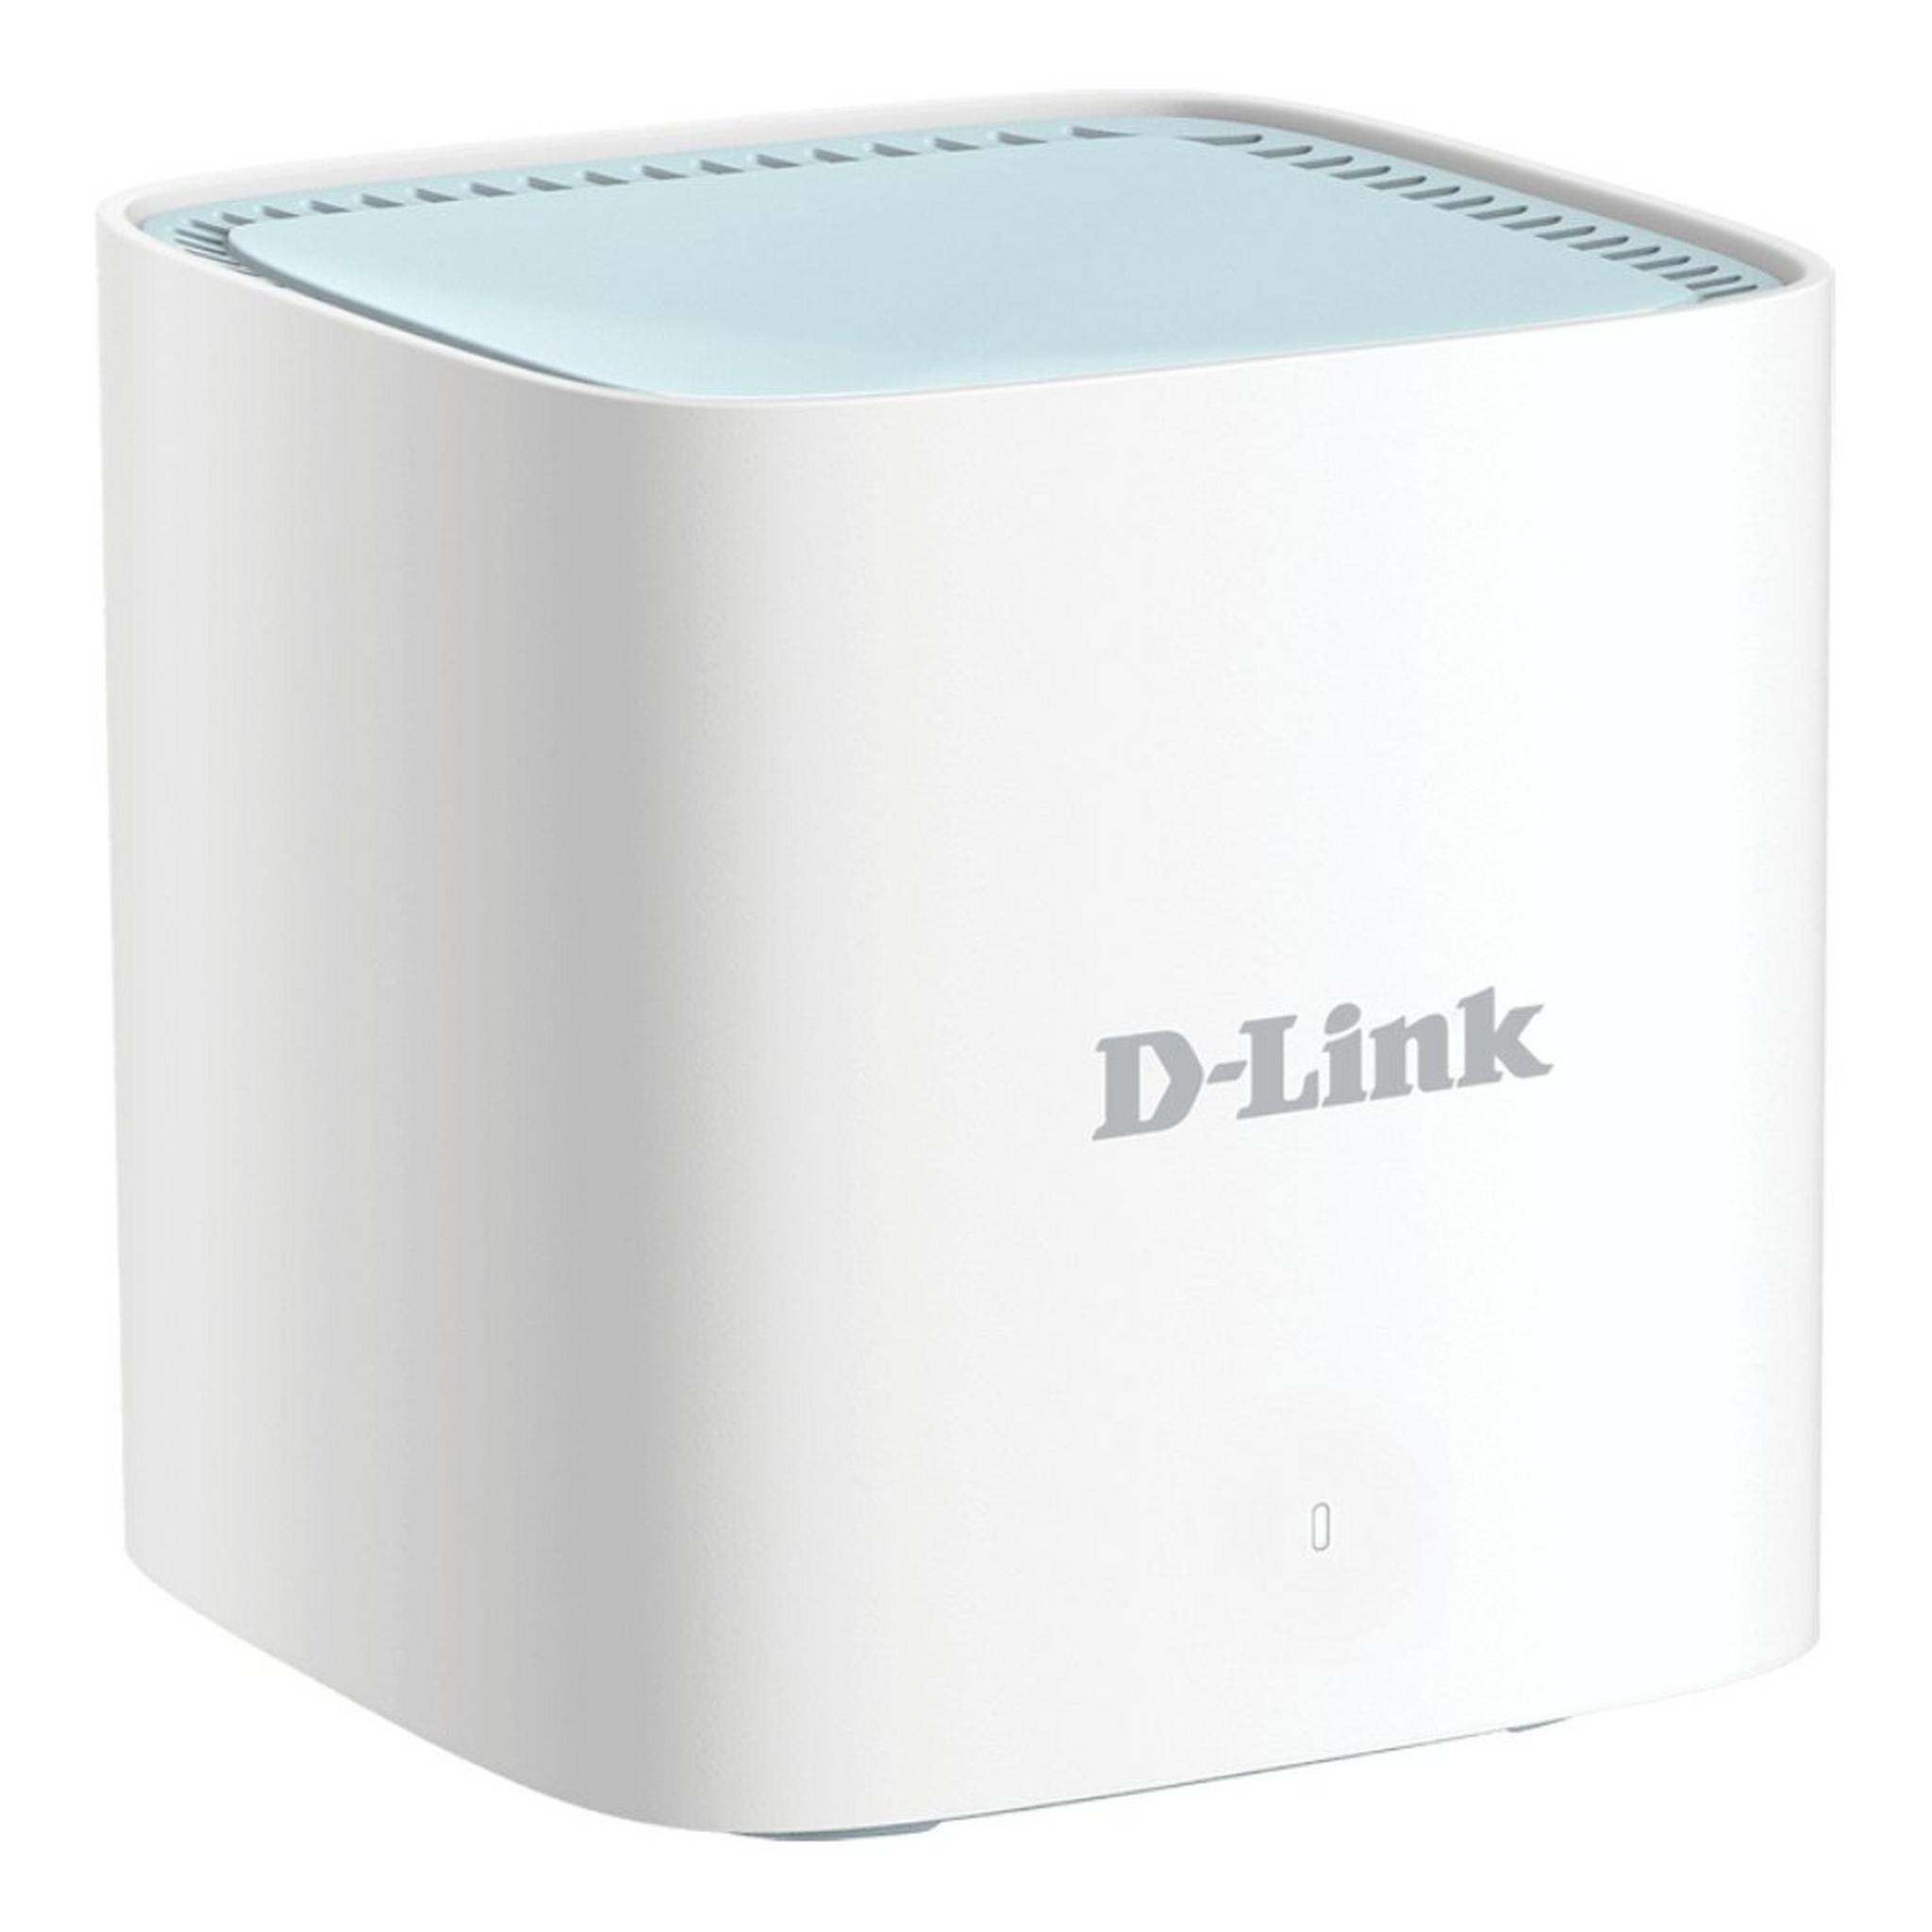 DLink M15-AX1500 Wi-Fi 6 Mesh Router - 3 Packs